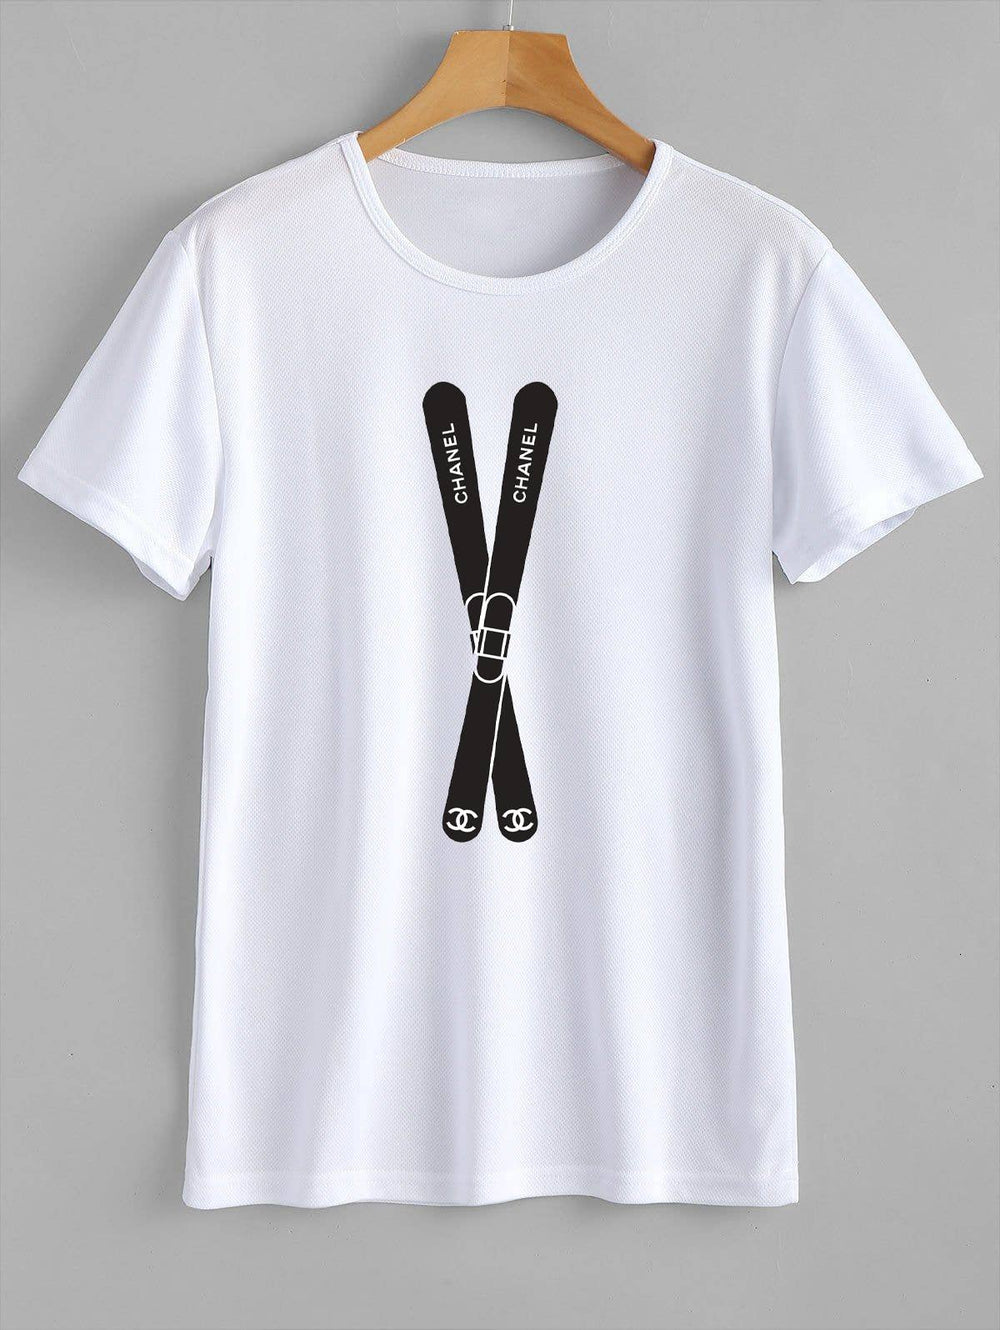 Sold Out - T-shirt- DESIGNER INSPIRED FRENCH SKIS